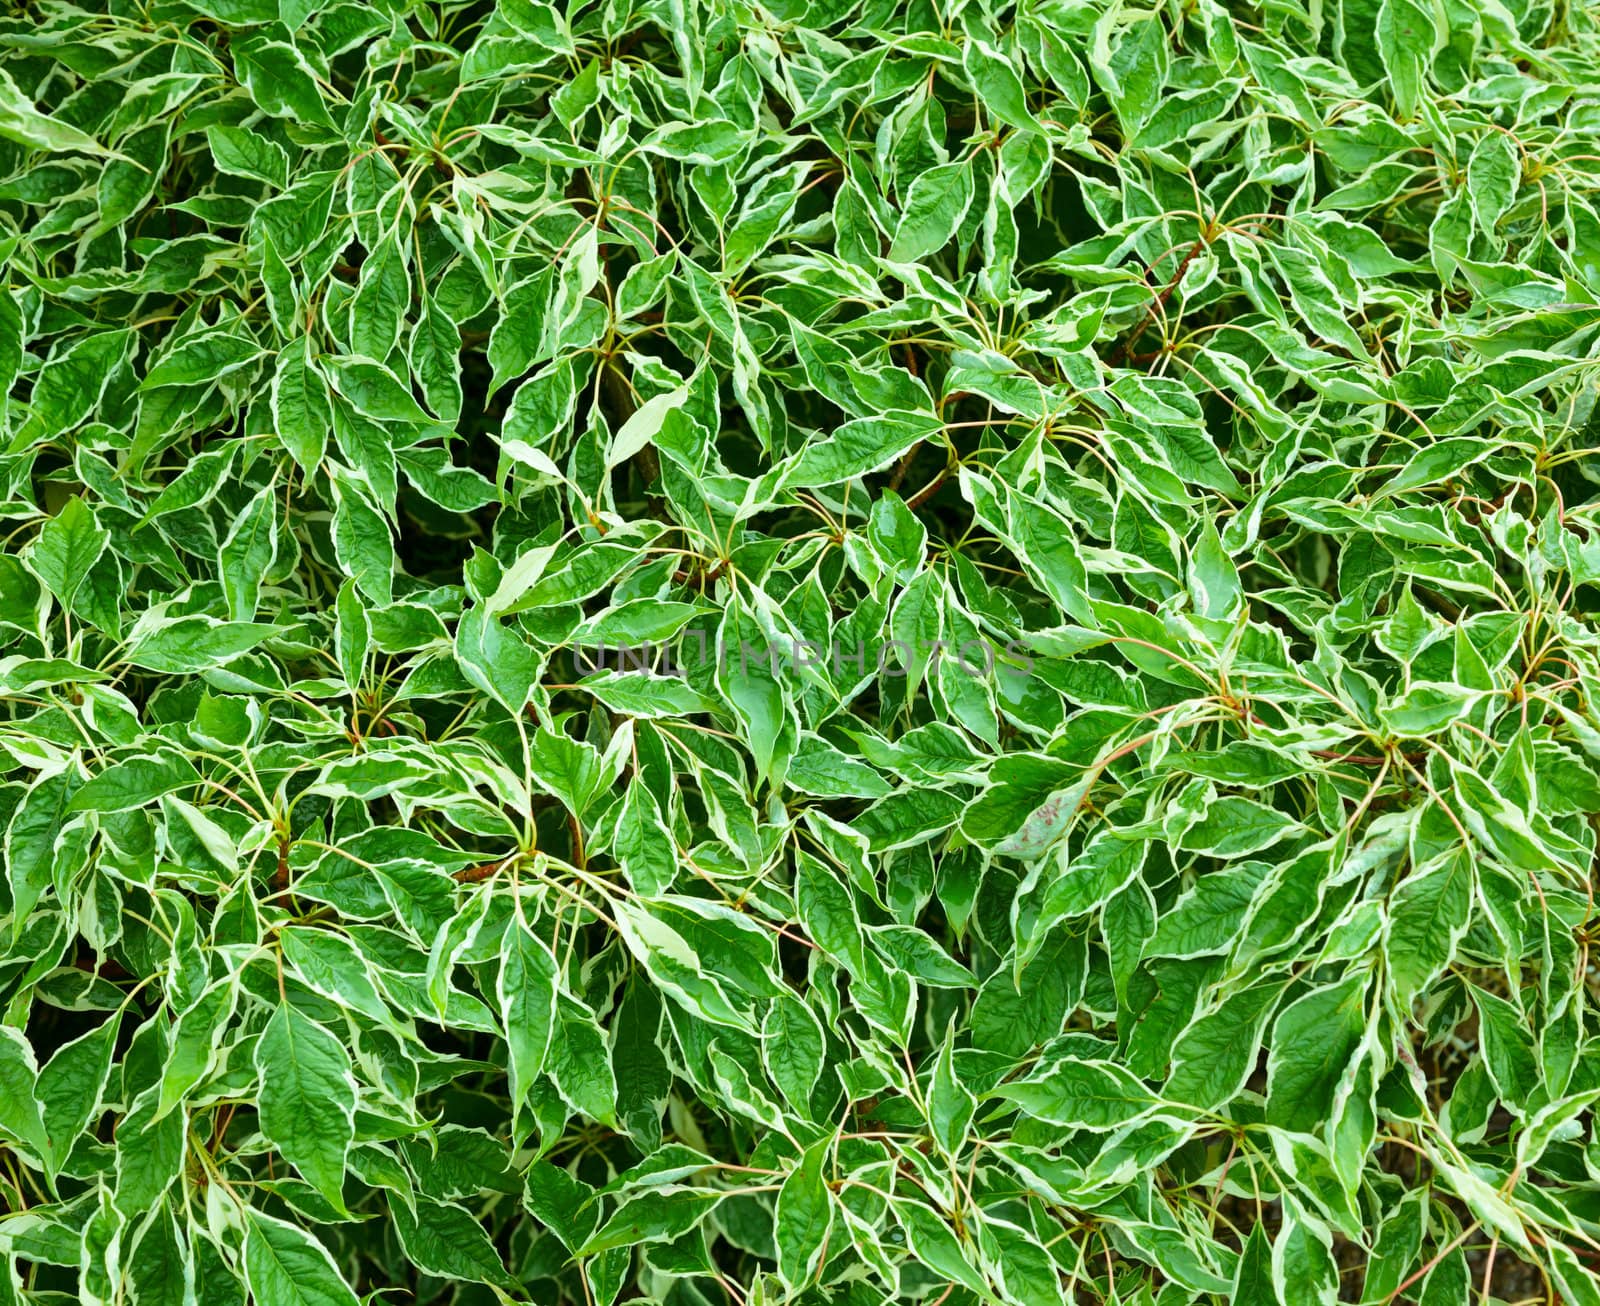 Green leaves close-up natural background